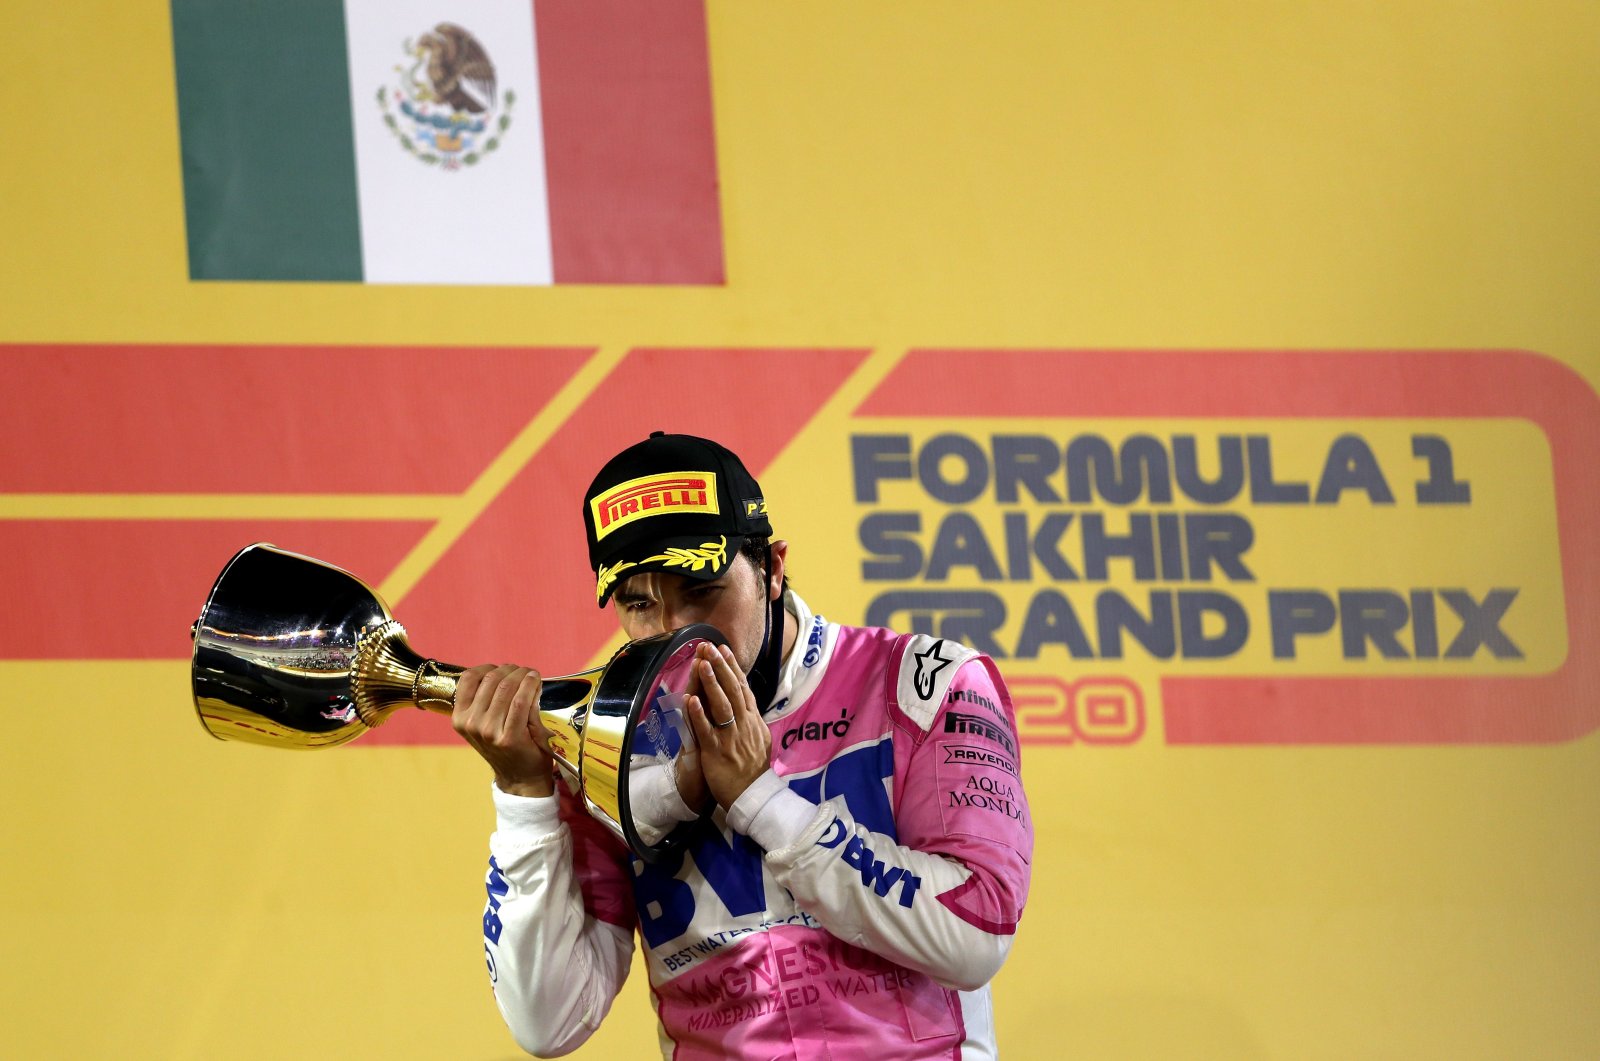 Racing Point's Mexican driver Sergio Perez kisses his 1st-place trophy on the podium after the Sakhir Formula One Grand Prix at the Bahrain International Circuit in the city of Sakhir on Dec. 6, 2020. (AFP Photo)